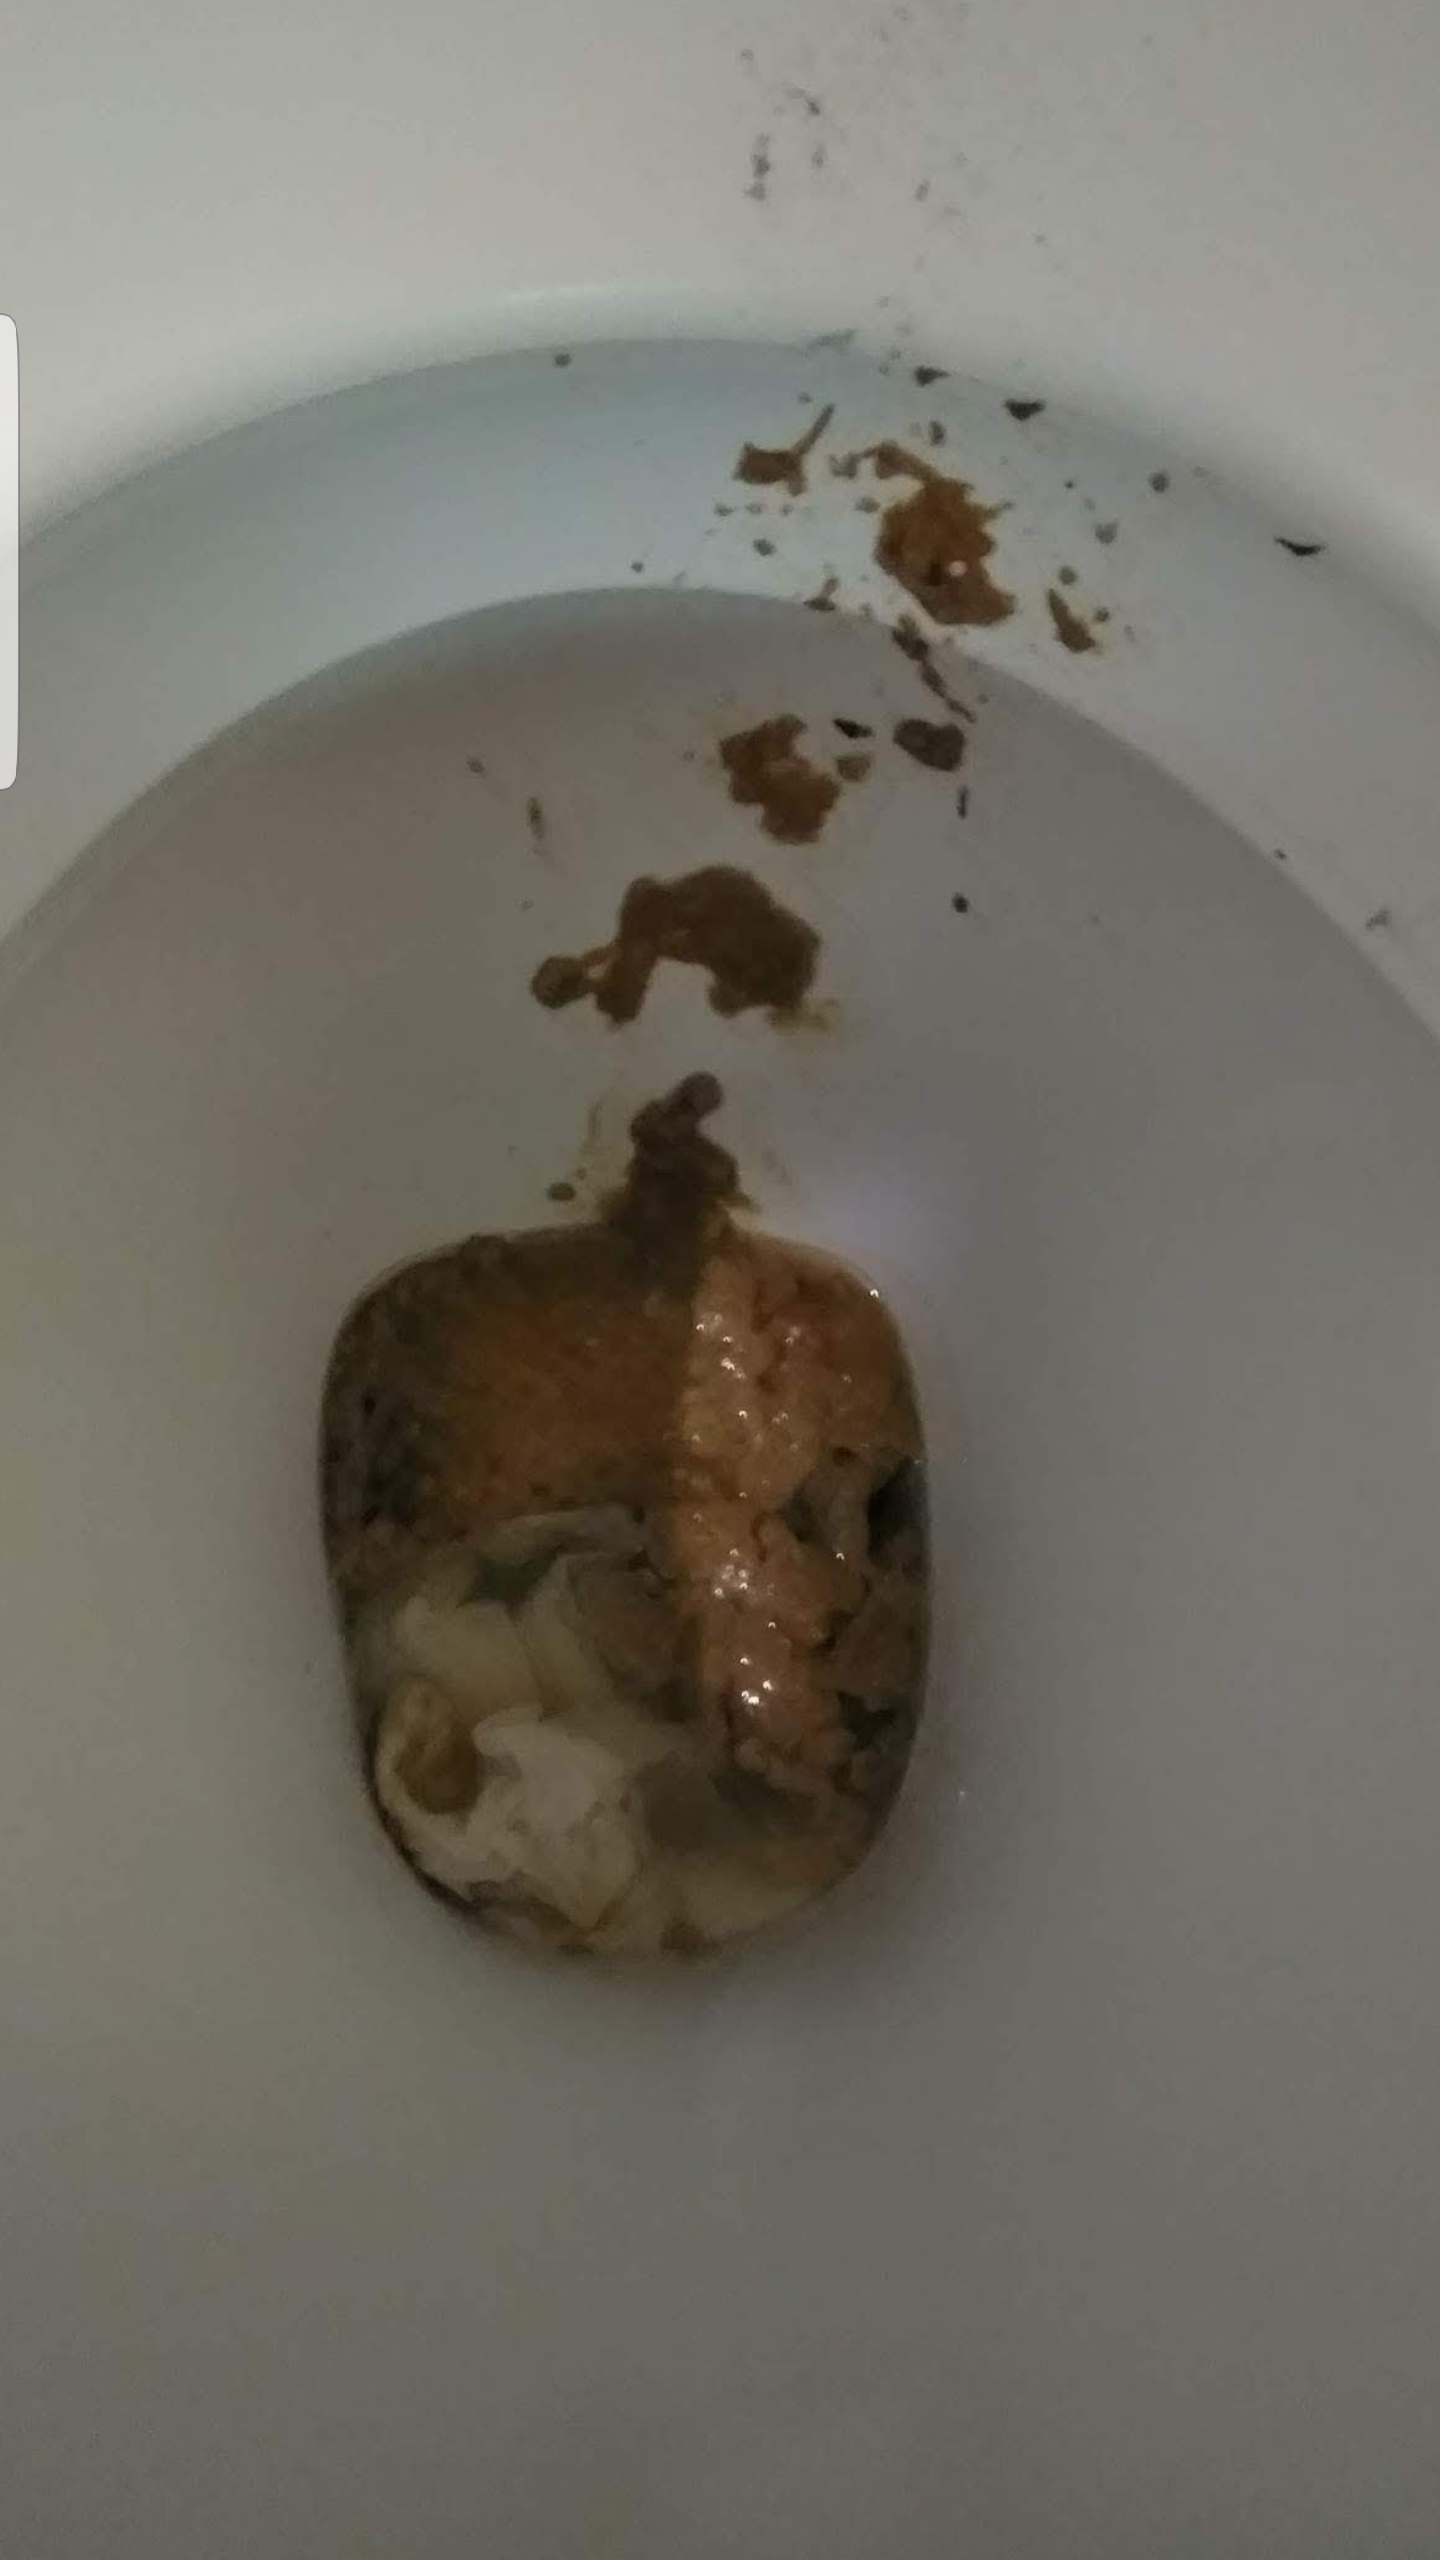 Bad farty morning shit on connors loo